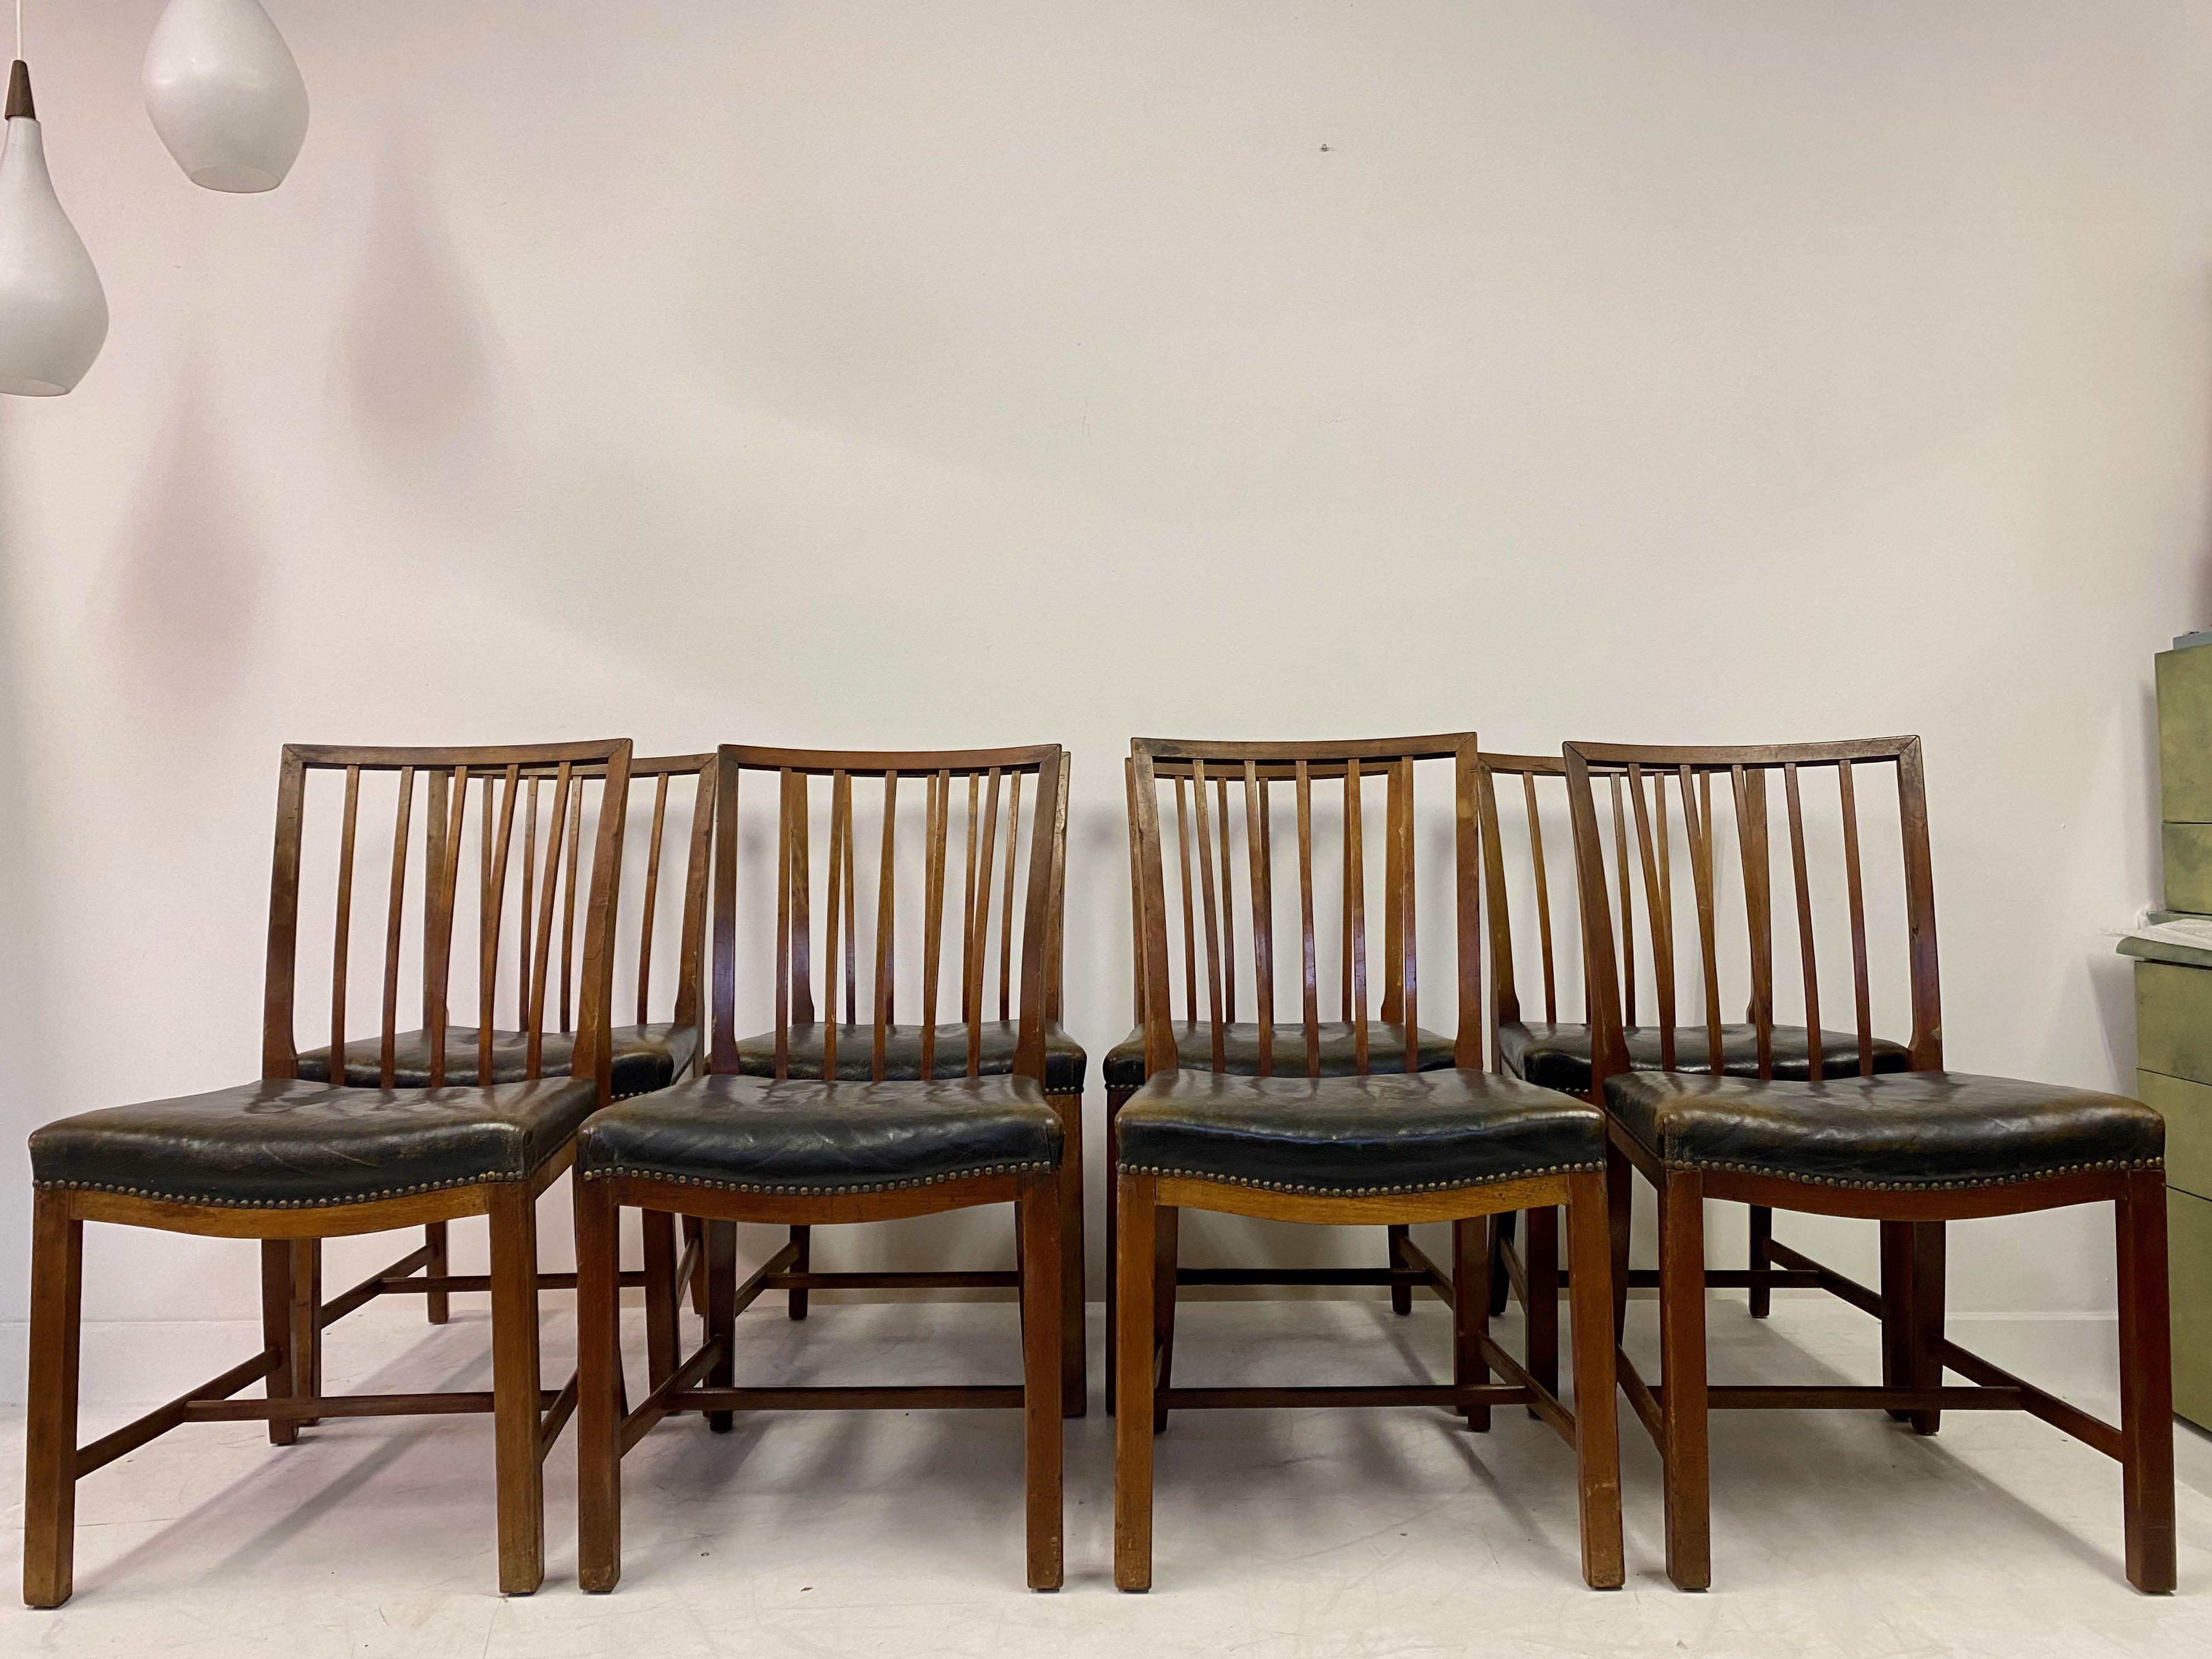 Set of eight dining chairs

By master cabinetmaker Frits Henningsen

Teak frame

Original leather

1935-1945

Denmark

Measures: Seat height 47cm.